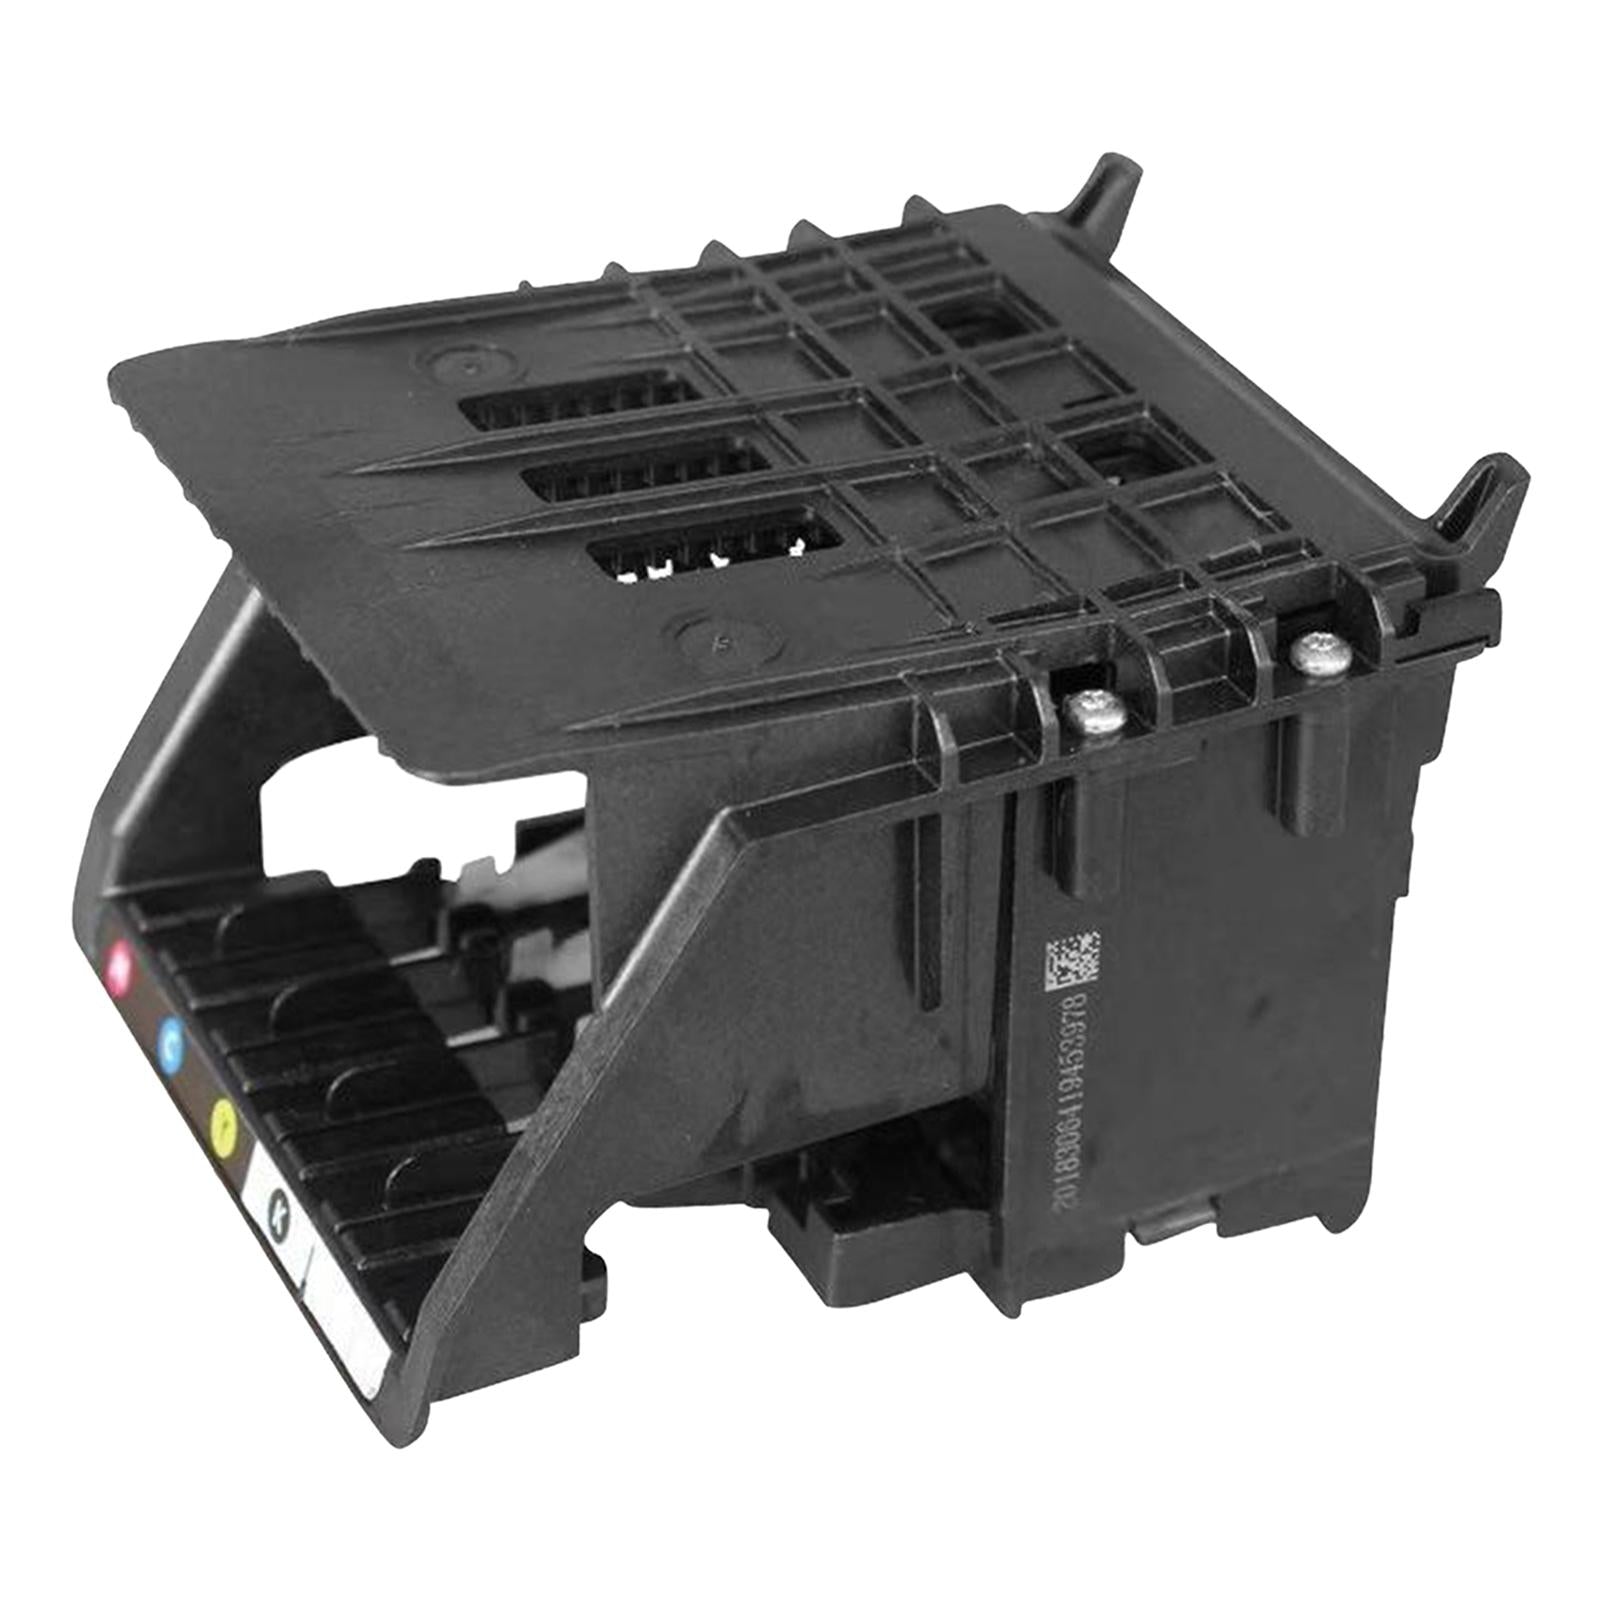 Printer Head for HP Officejet 950 8100 8600 8610 8620 8650 Professional